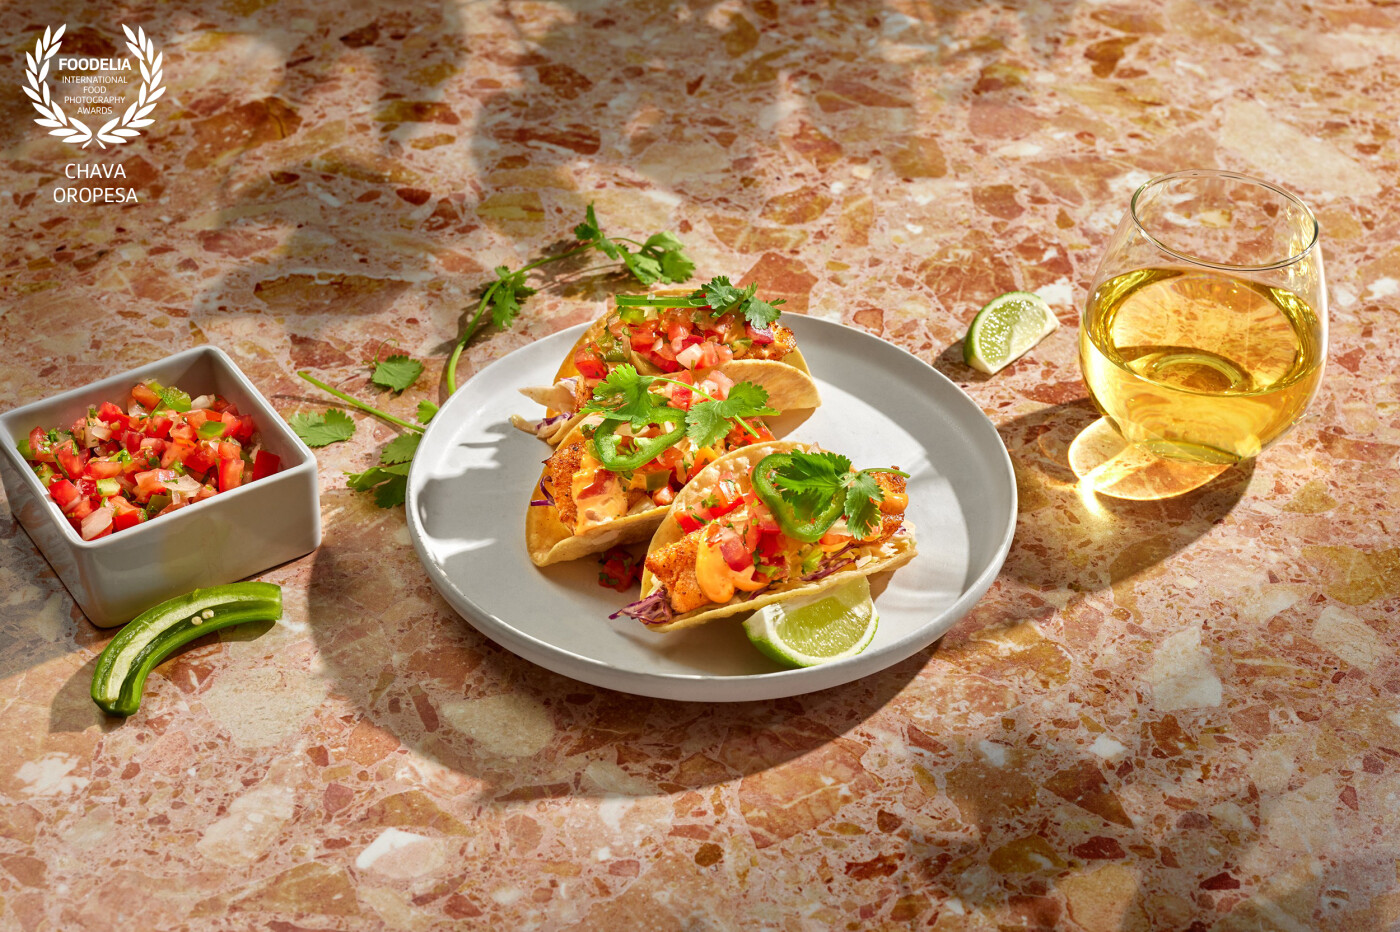 Client work, crispy fish tacos for La More, a local Mexican Food Service company.